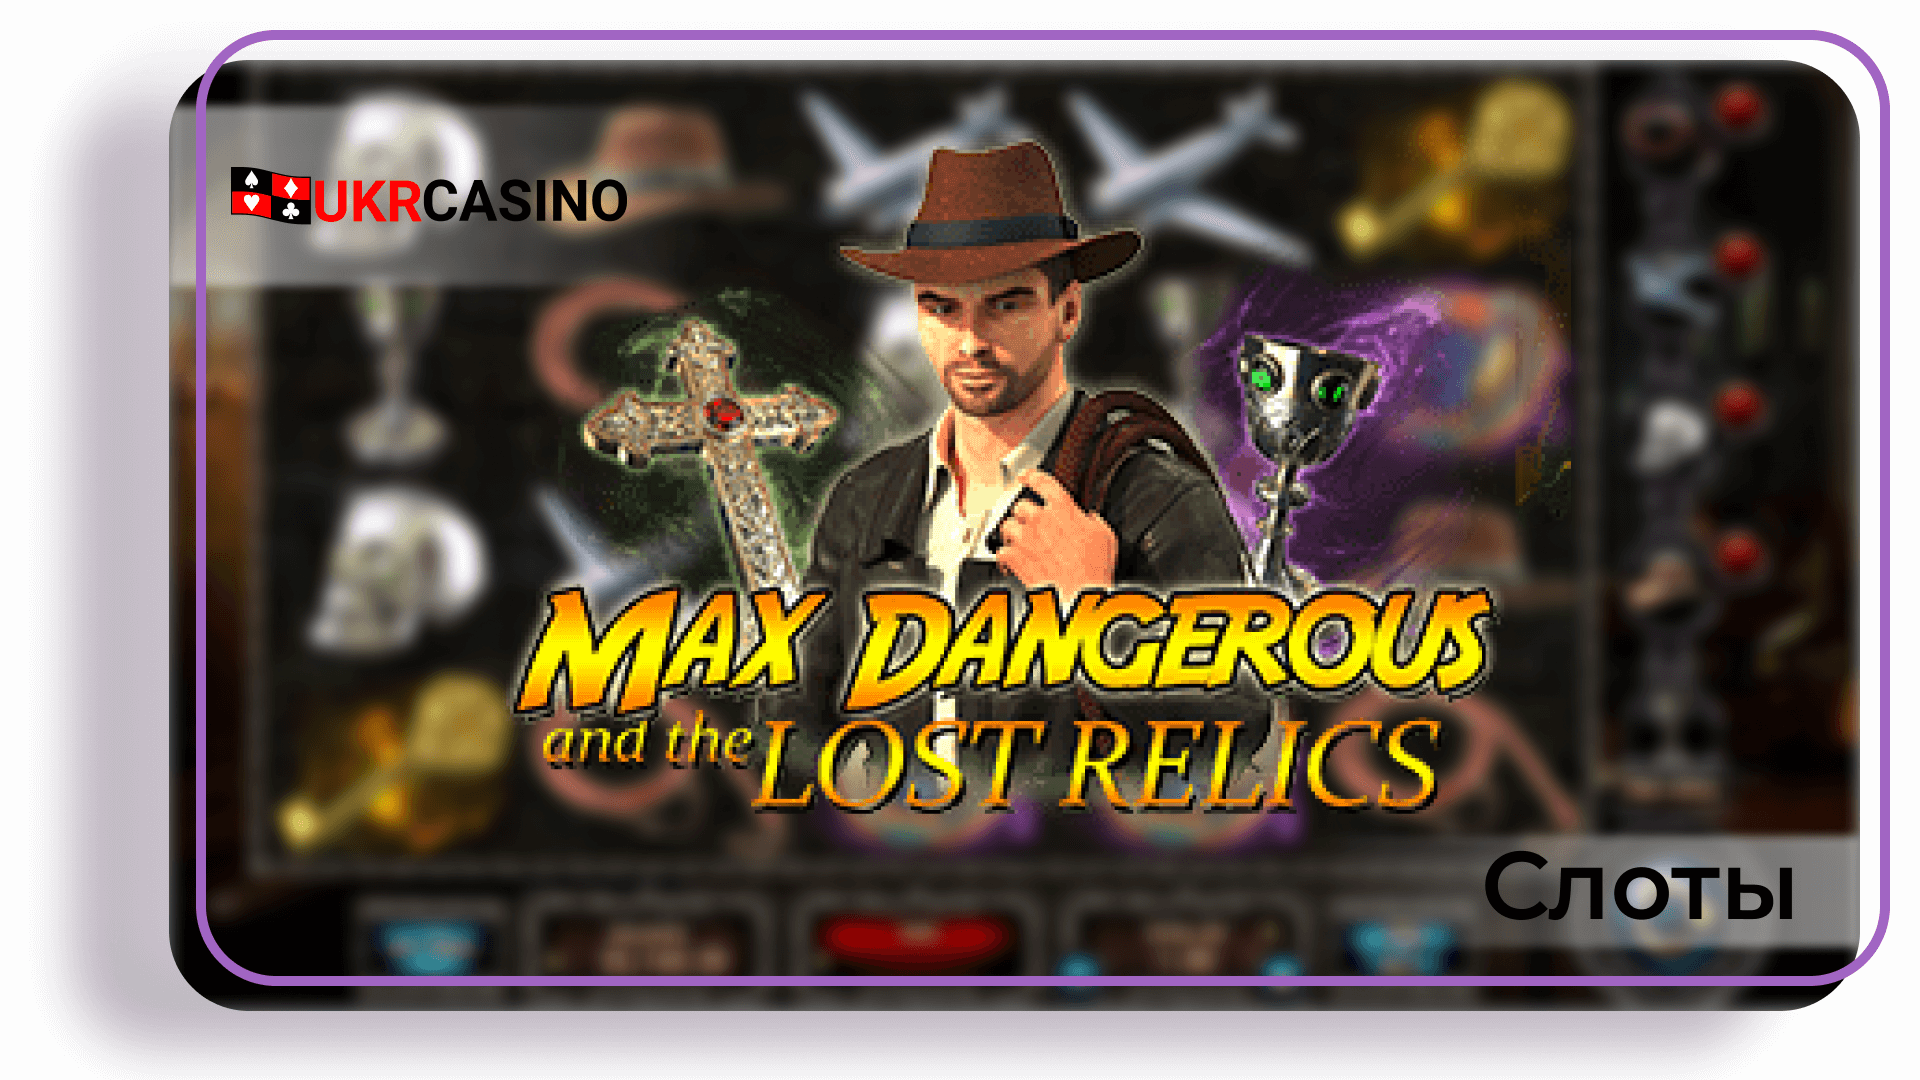 Max Dangerous and the Lost Relics - Red Rake Gaming